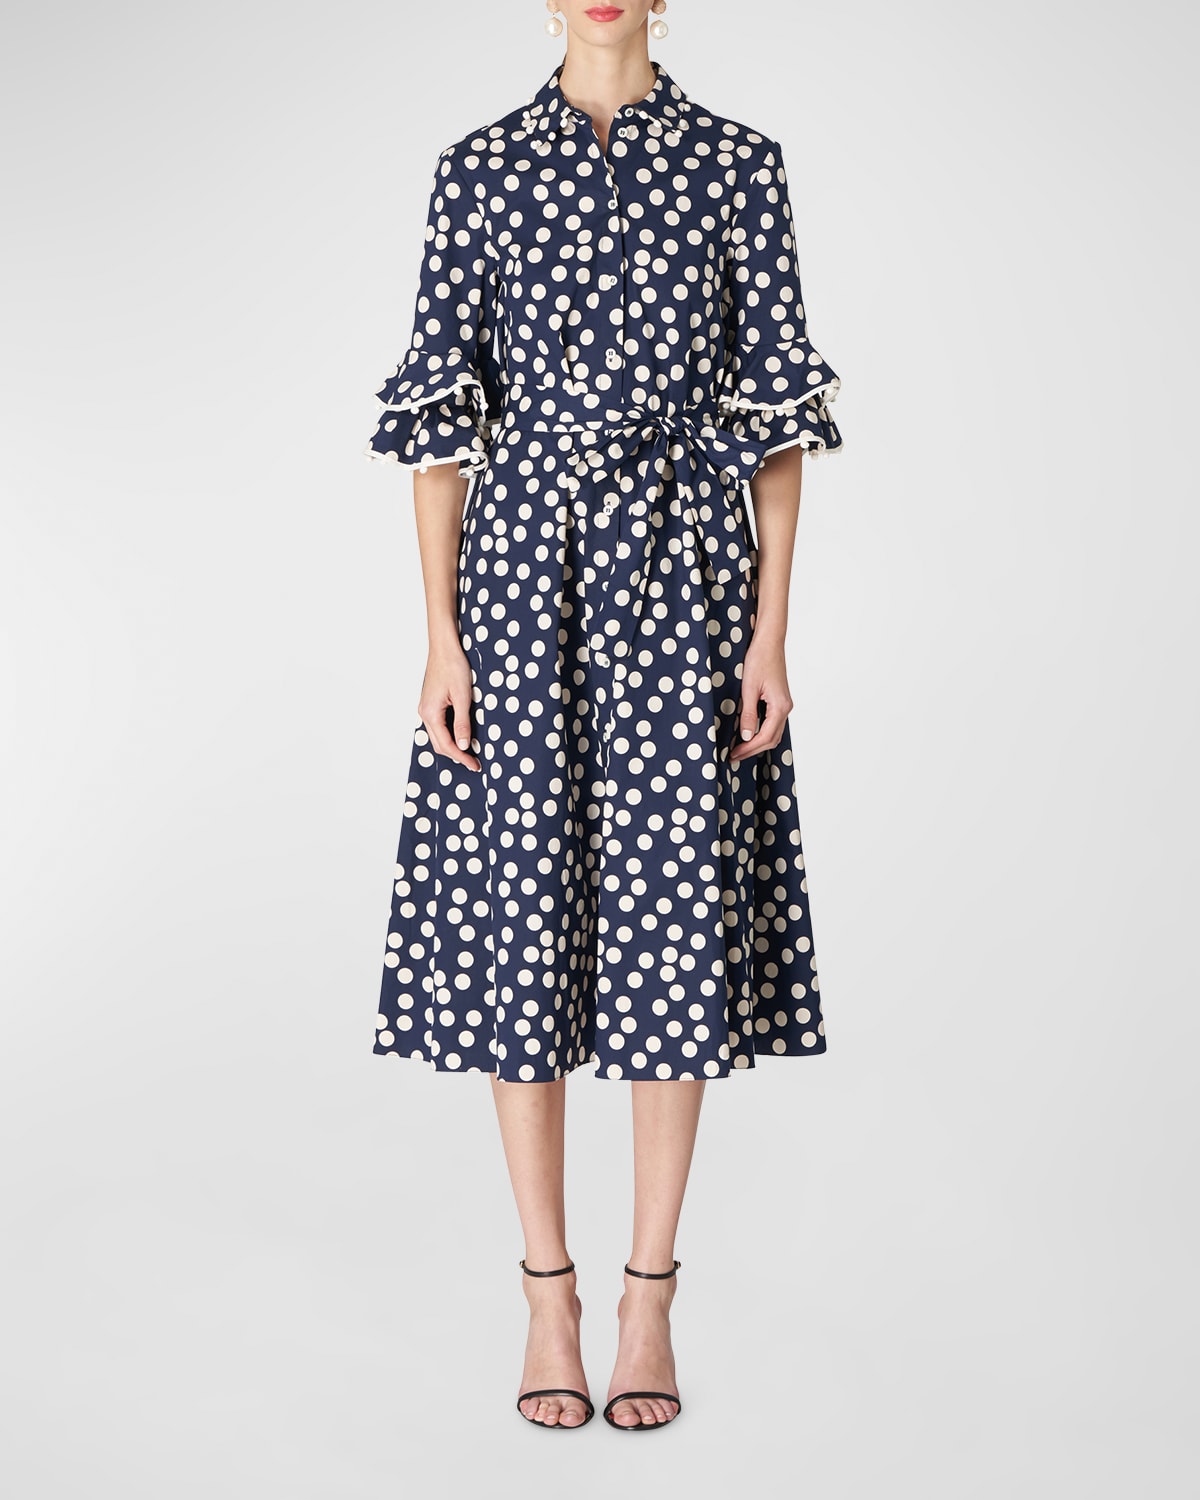 Belted Polka Dot Shirtdress with Ruffle Detail